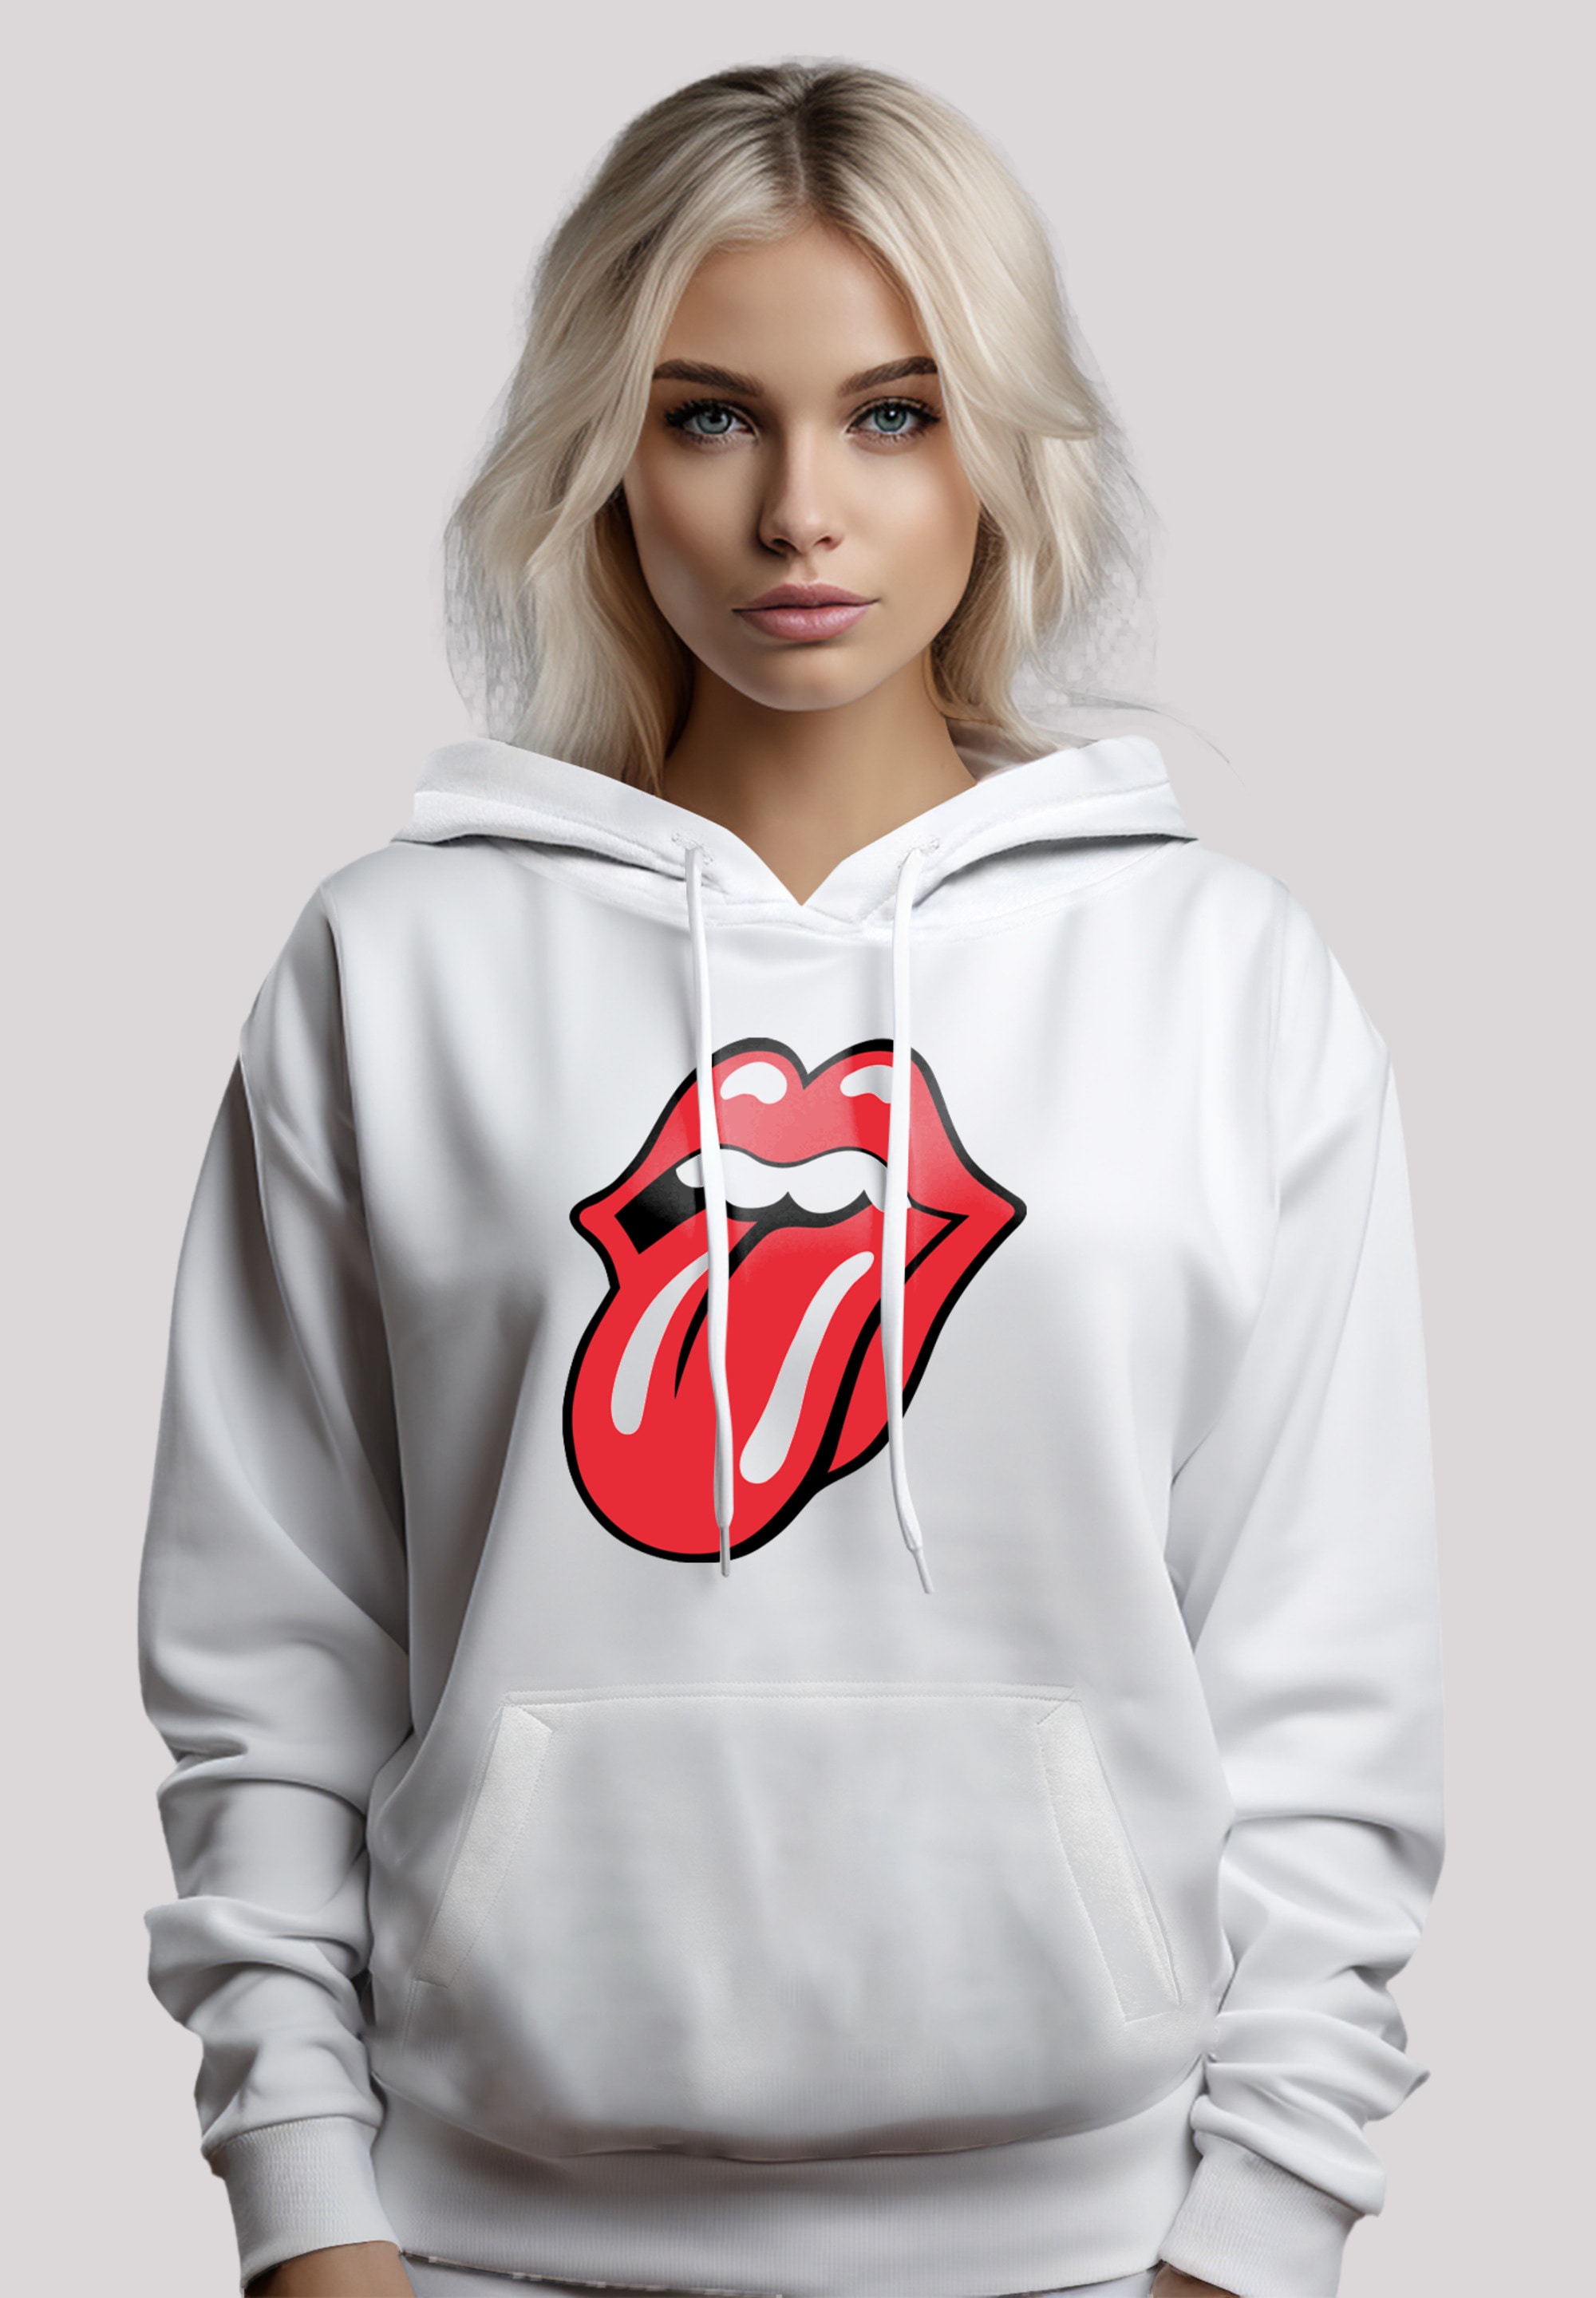 Warm, F4NT4STIC Hoodie, Band«, Stones Zunge Rolling Musik Rock Classic online | »The Kapuzenpullover Bequem kaufen I\'m walking